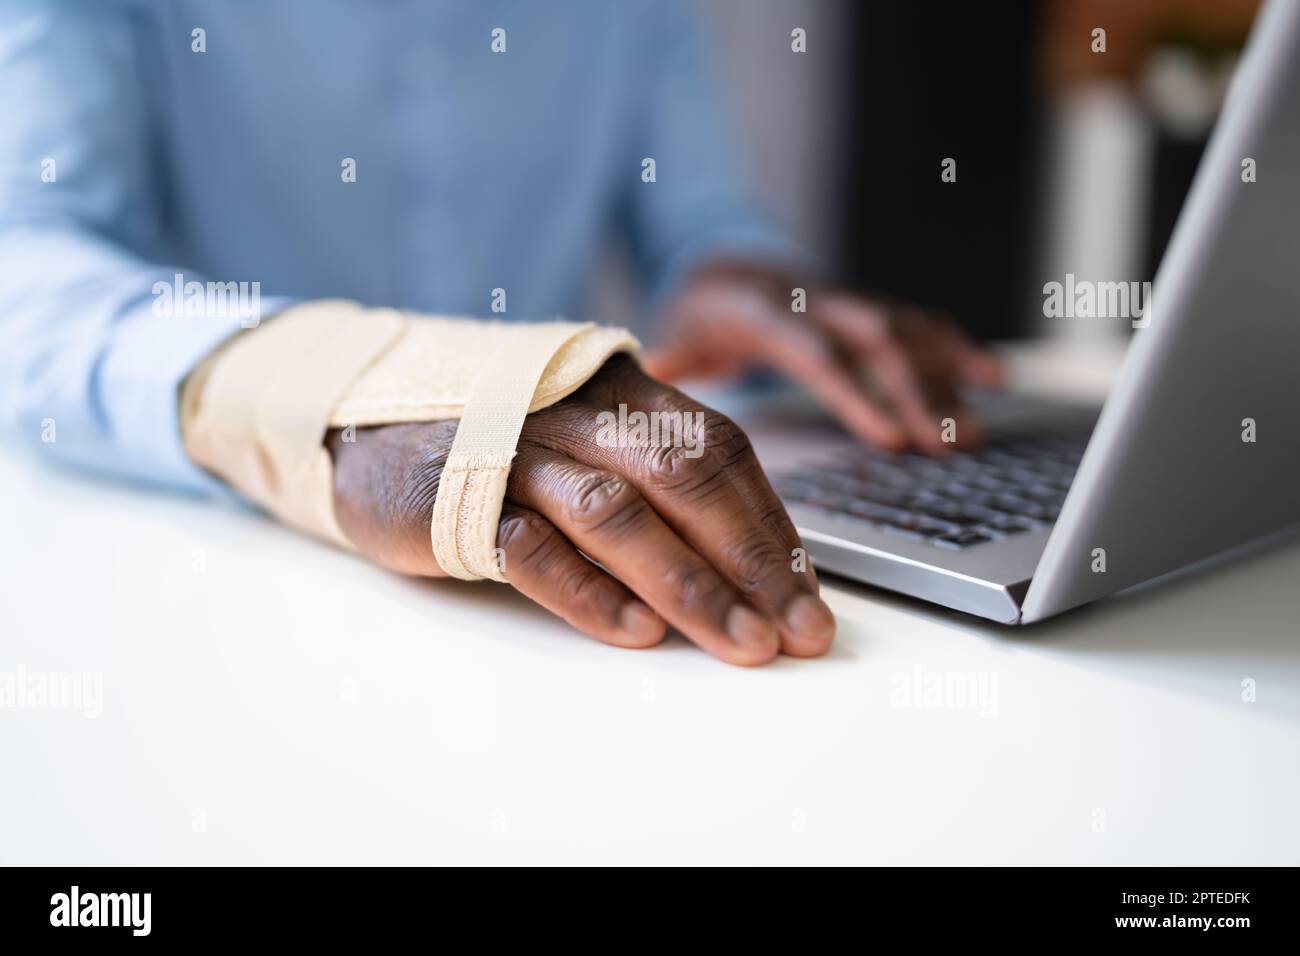 Broken Arm Office Accident. Worker Compensation And Social Coverage Stock Photo